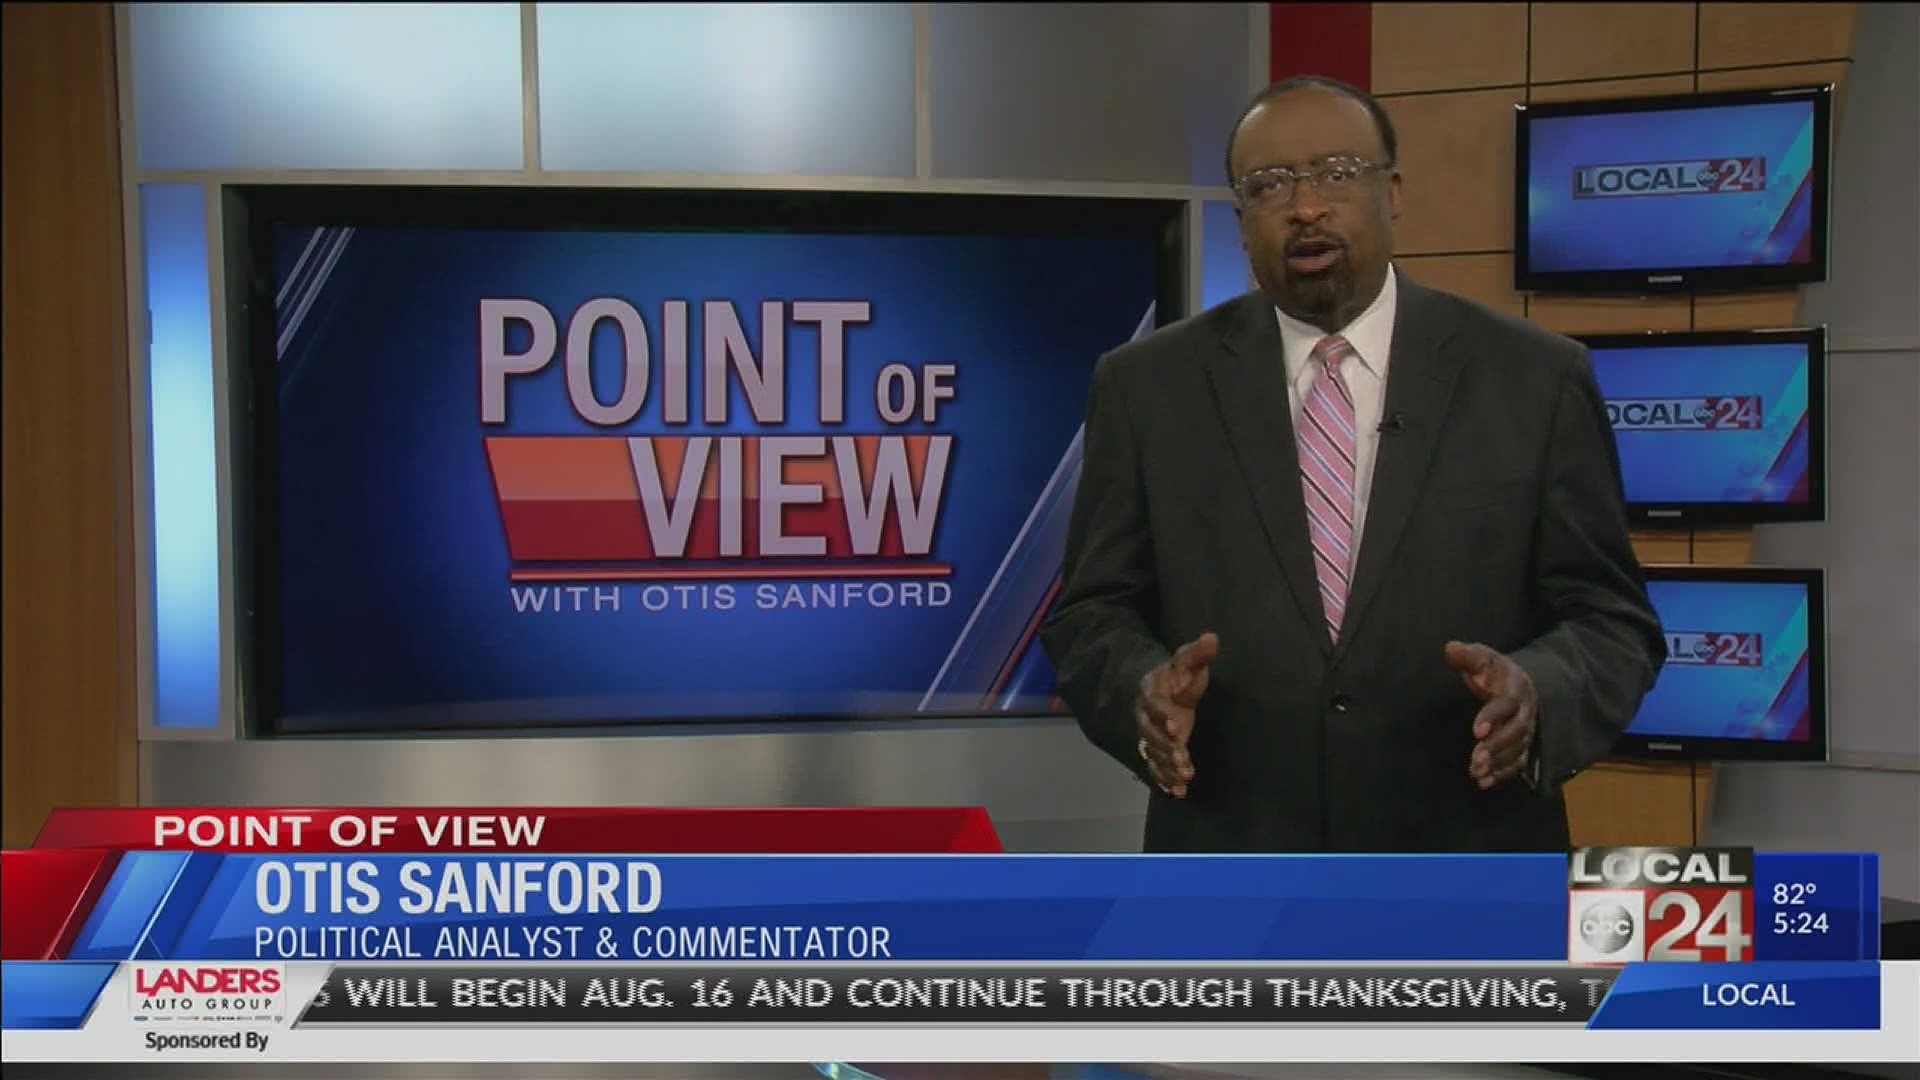 Local 24 News political analyst and commentator Otis Sanford shares his point of view lawmakers’ stock moves amid COVID-19.